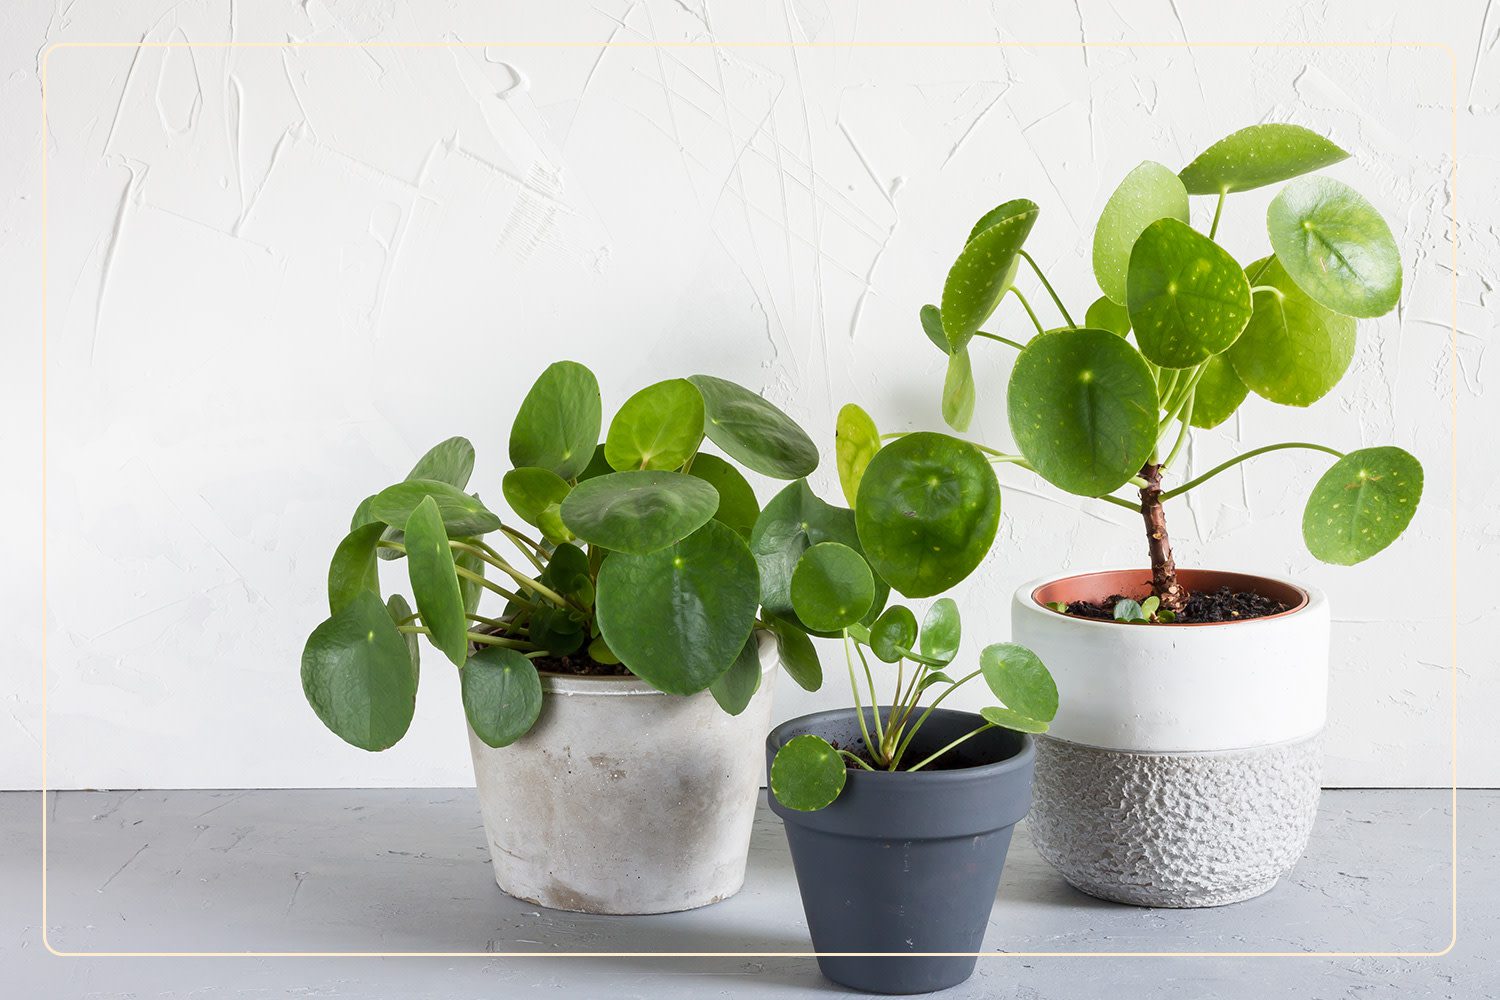 three Chinese Money Plants (Pilea peperomioides), which are pet-friendly houseplants, grow indoors in concrete, white, and matte black planters